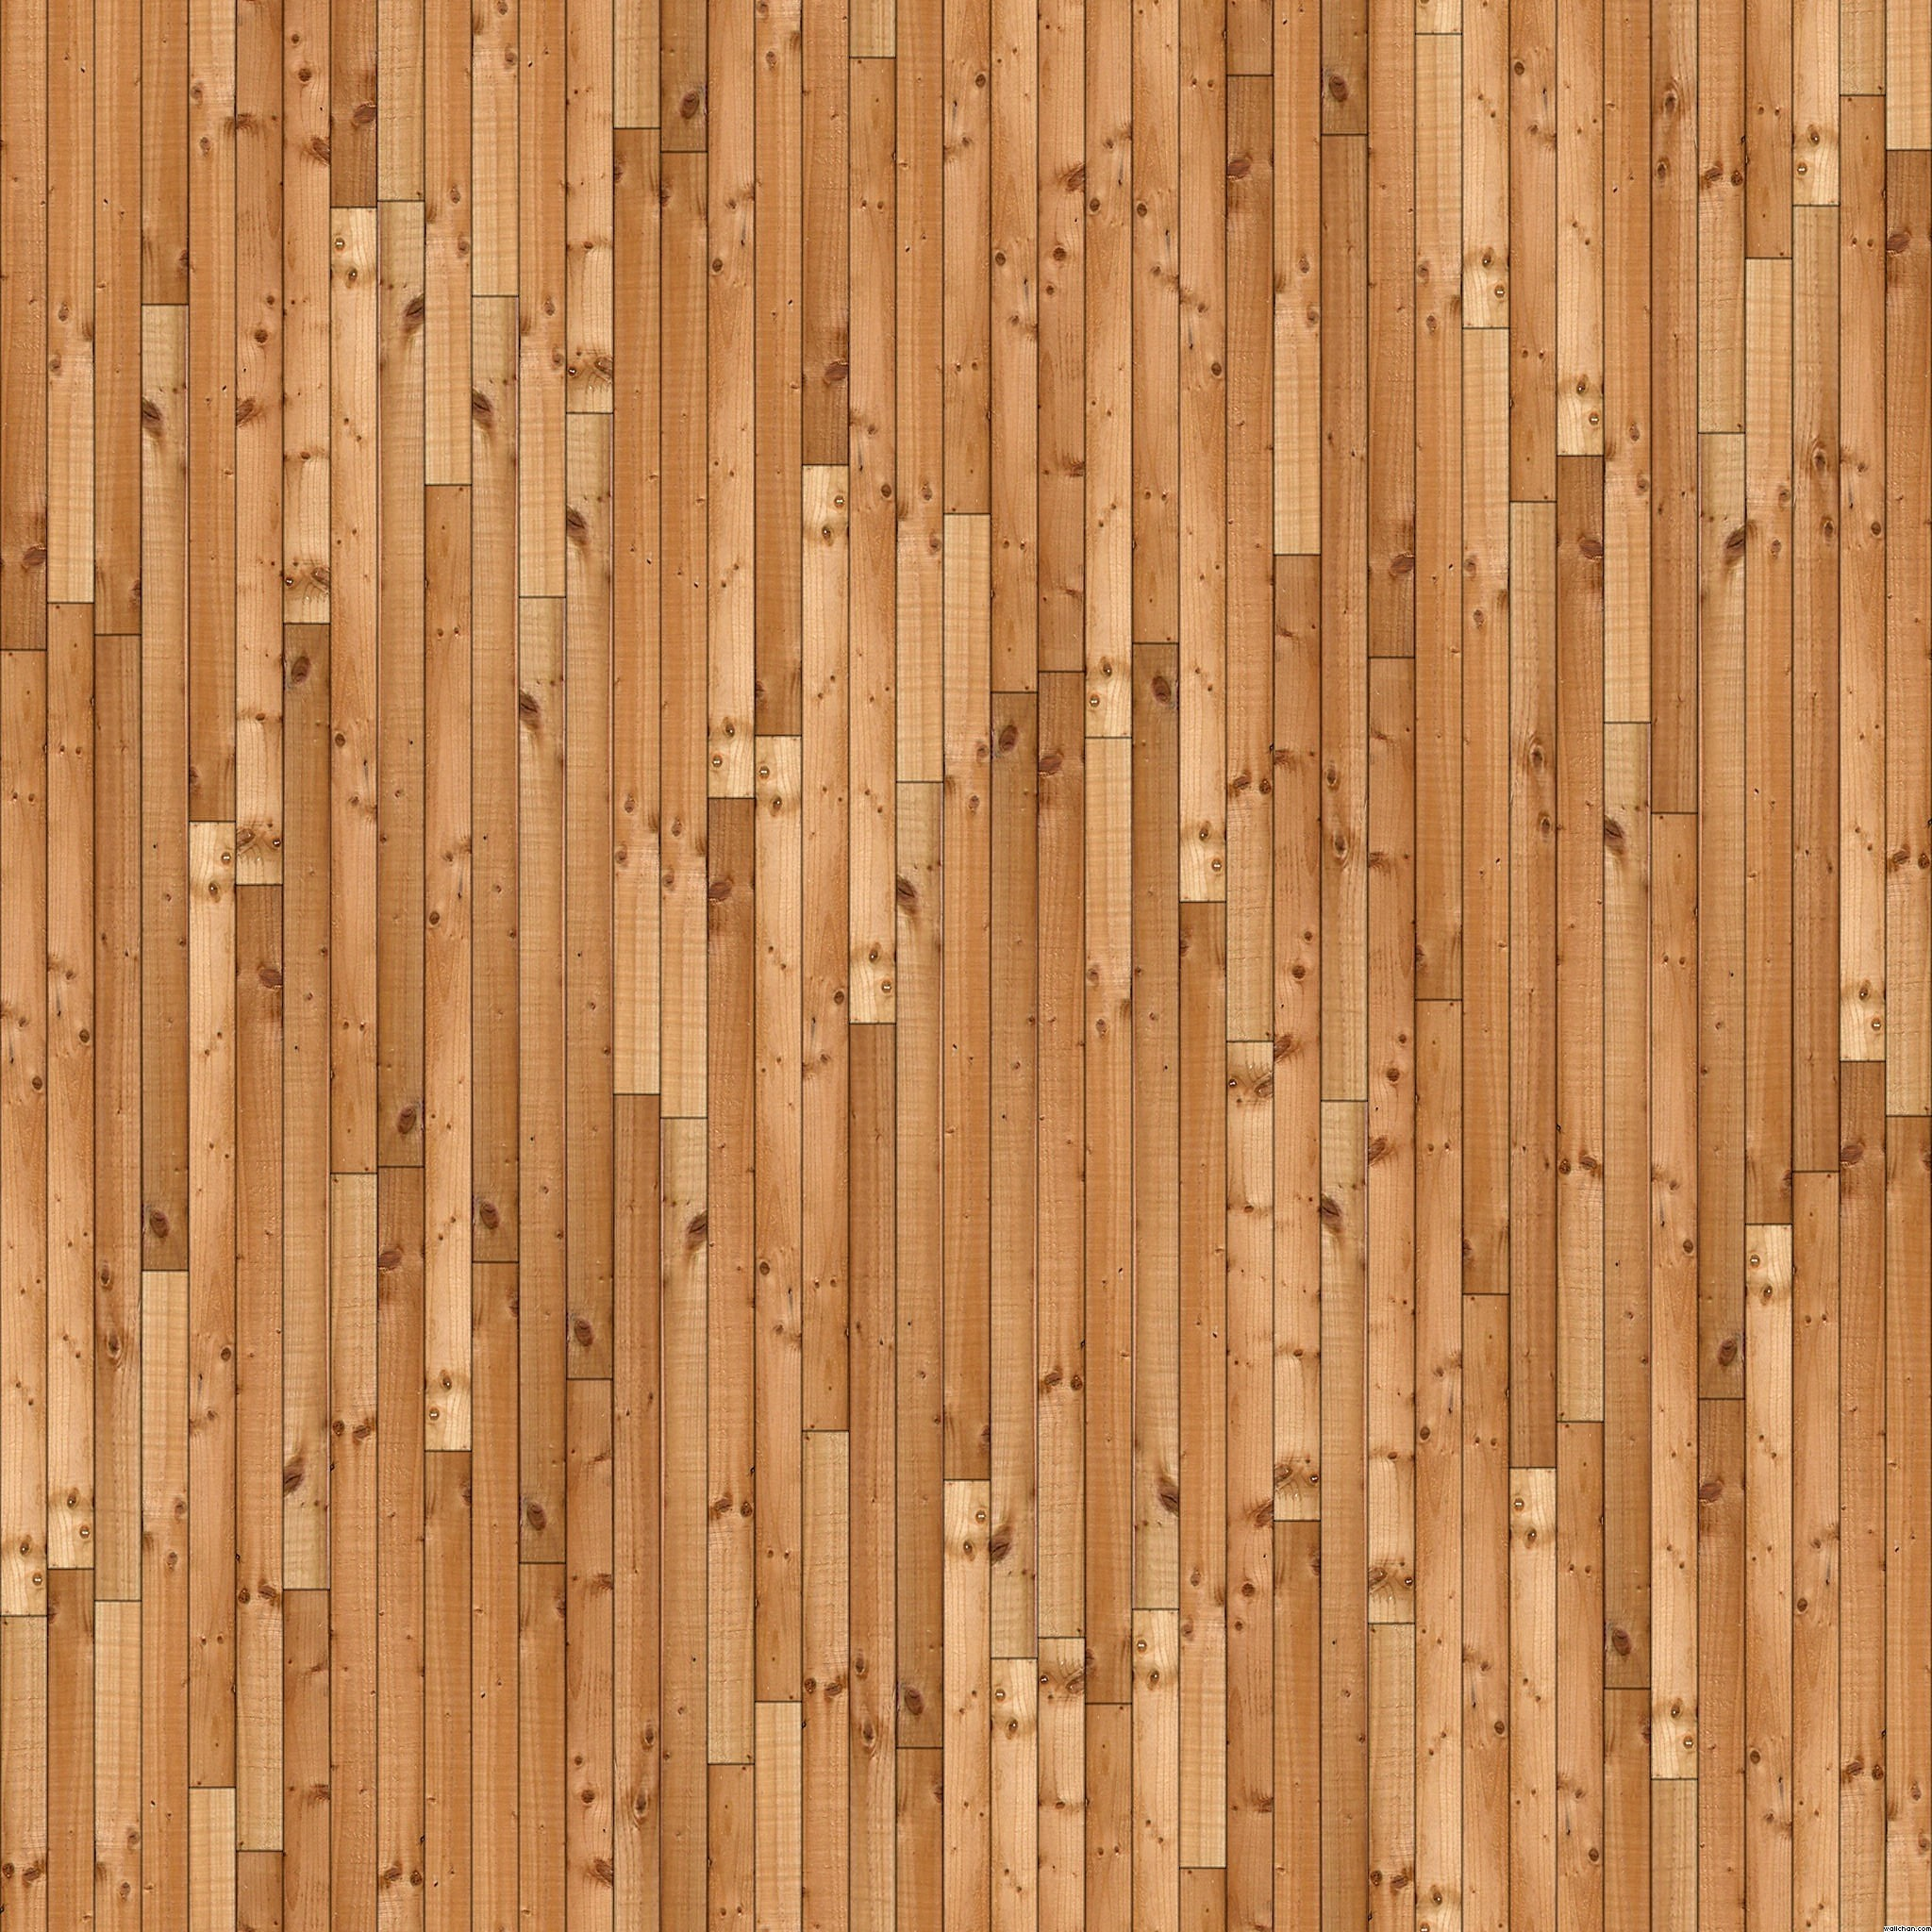 Newest Ipad 3 Wallpapers Hd Textures Wallpapers Wood - Wooden Decking Pattern Photoshop - HD Wallpaper 